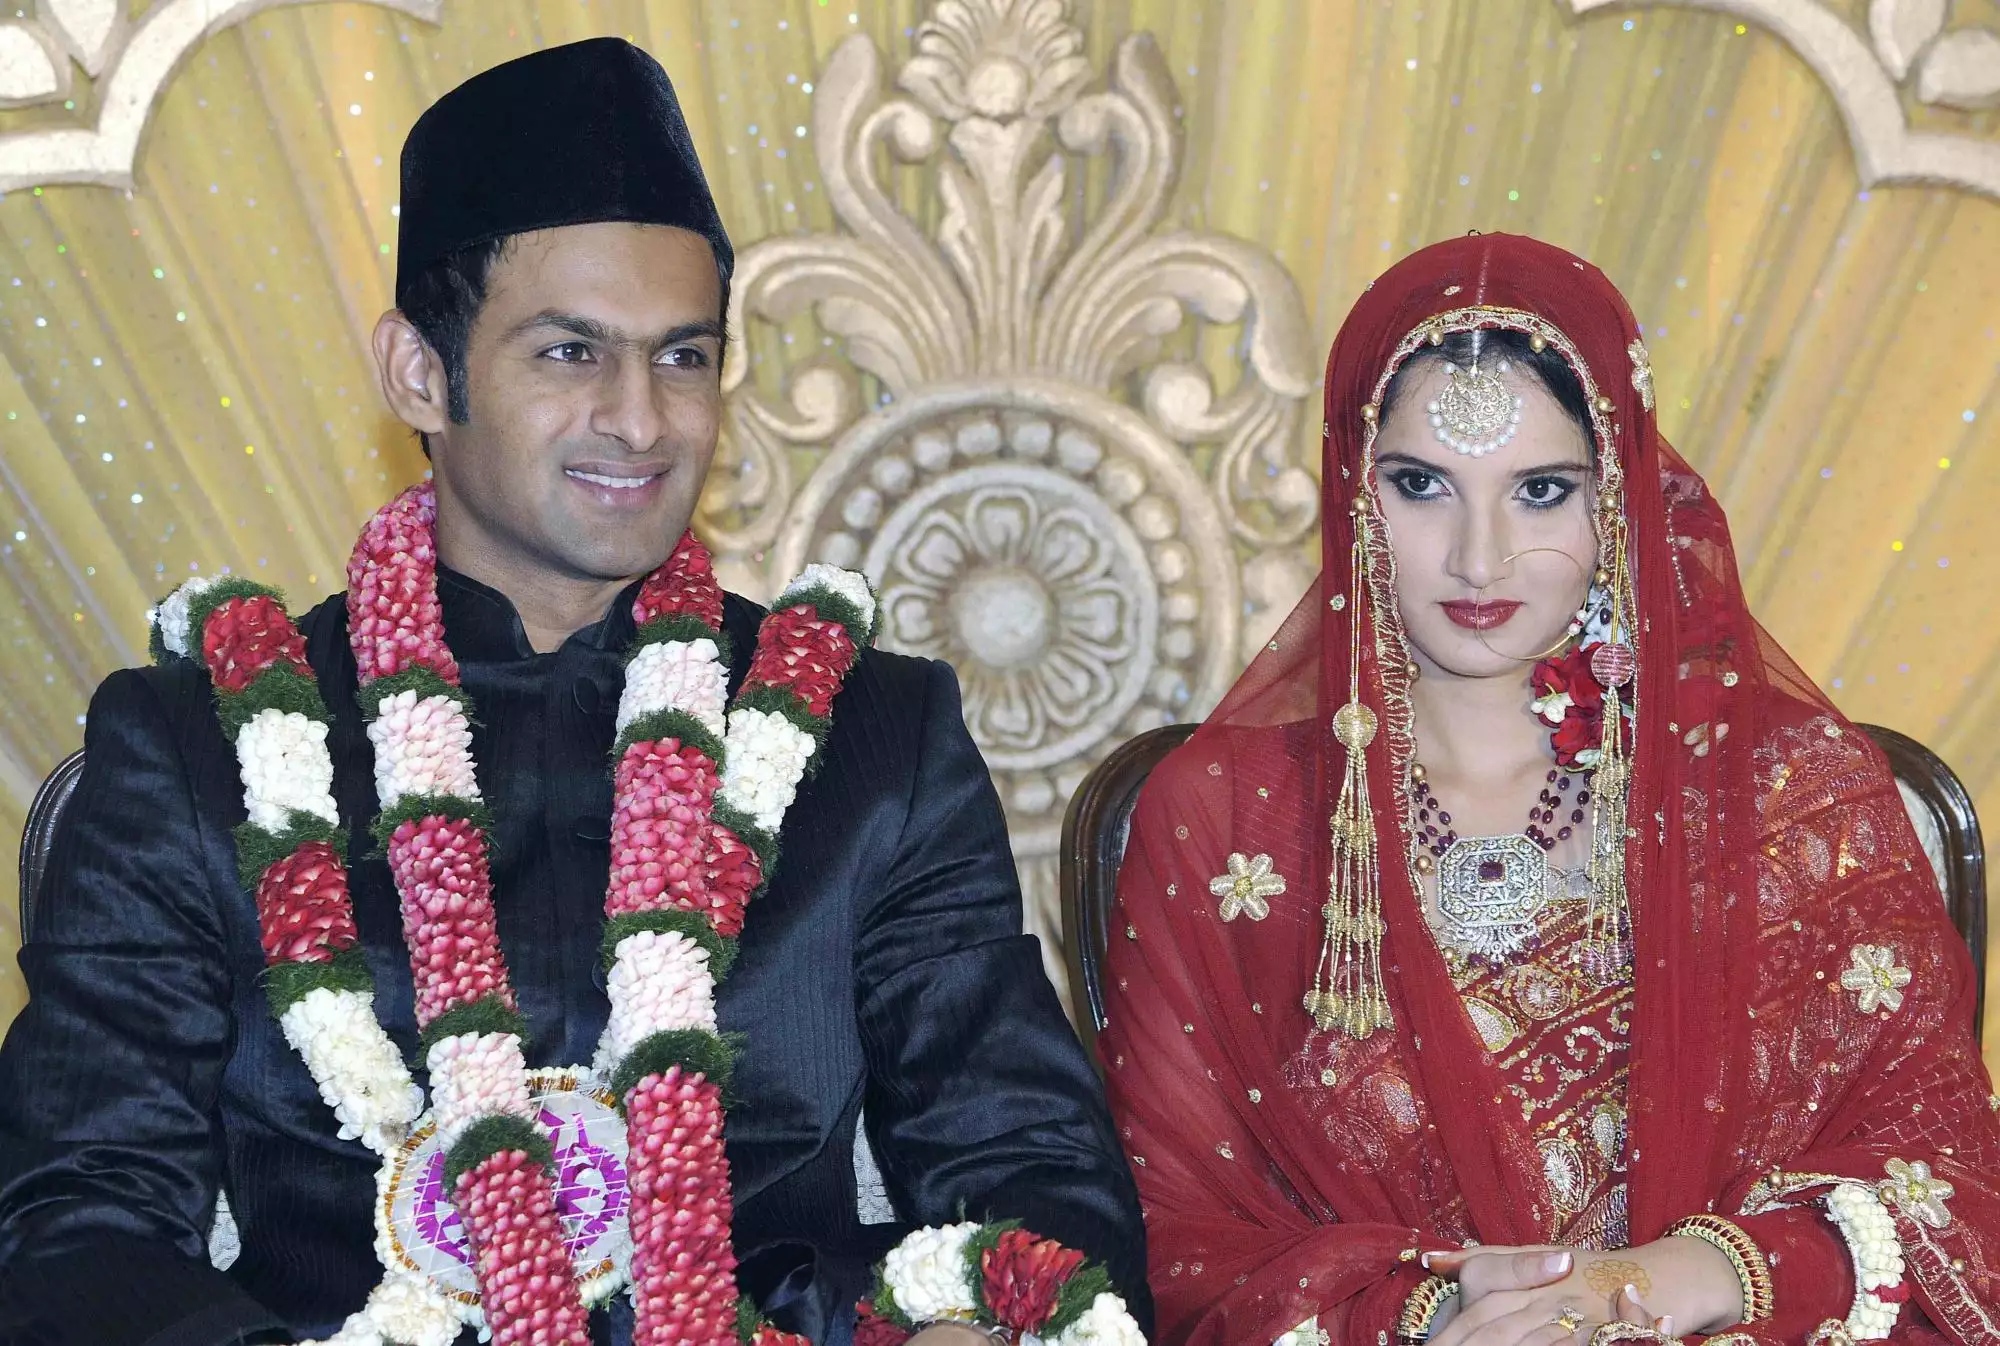 Sania Mirza's cryptic Insta post fuels speculations about her separation  from husband Shoaib Malik